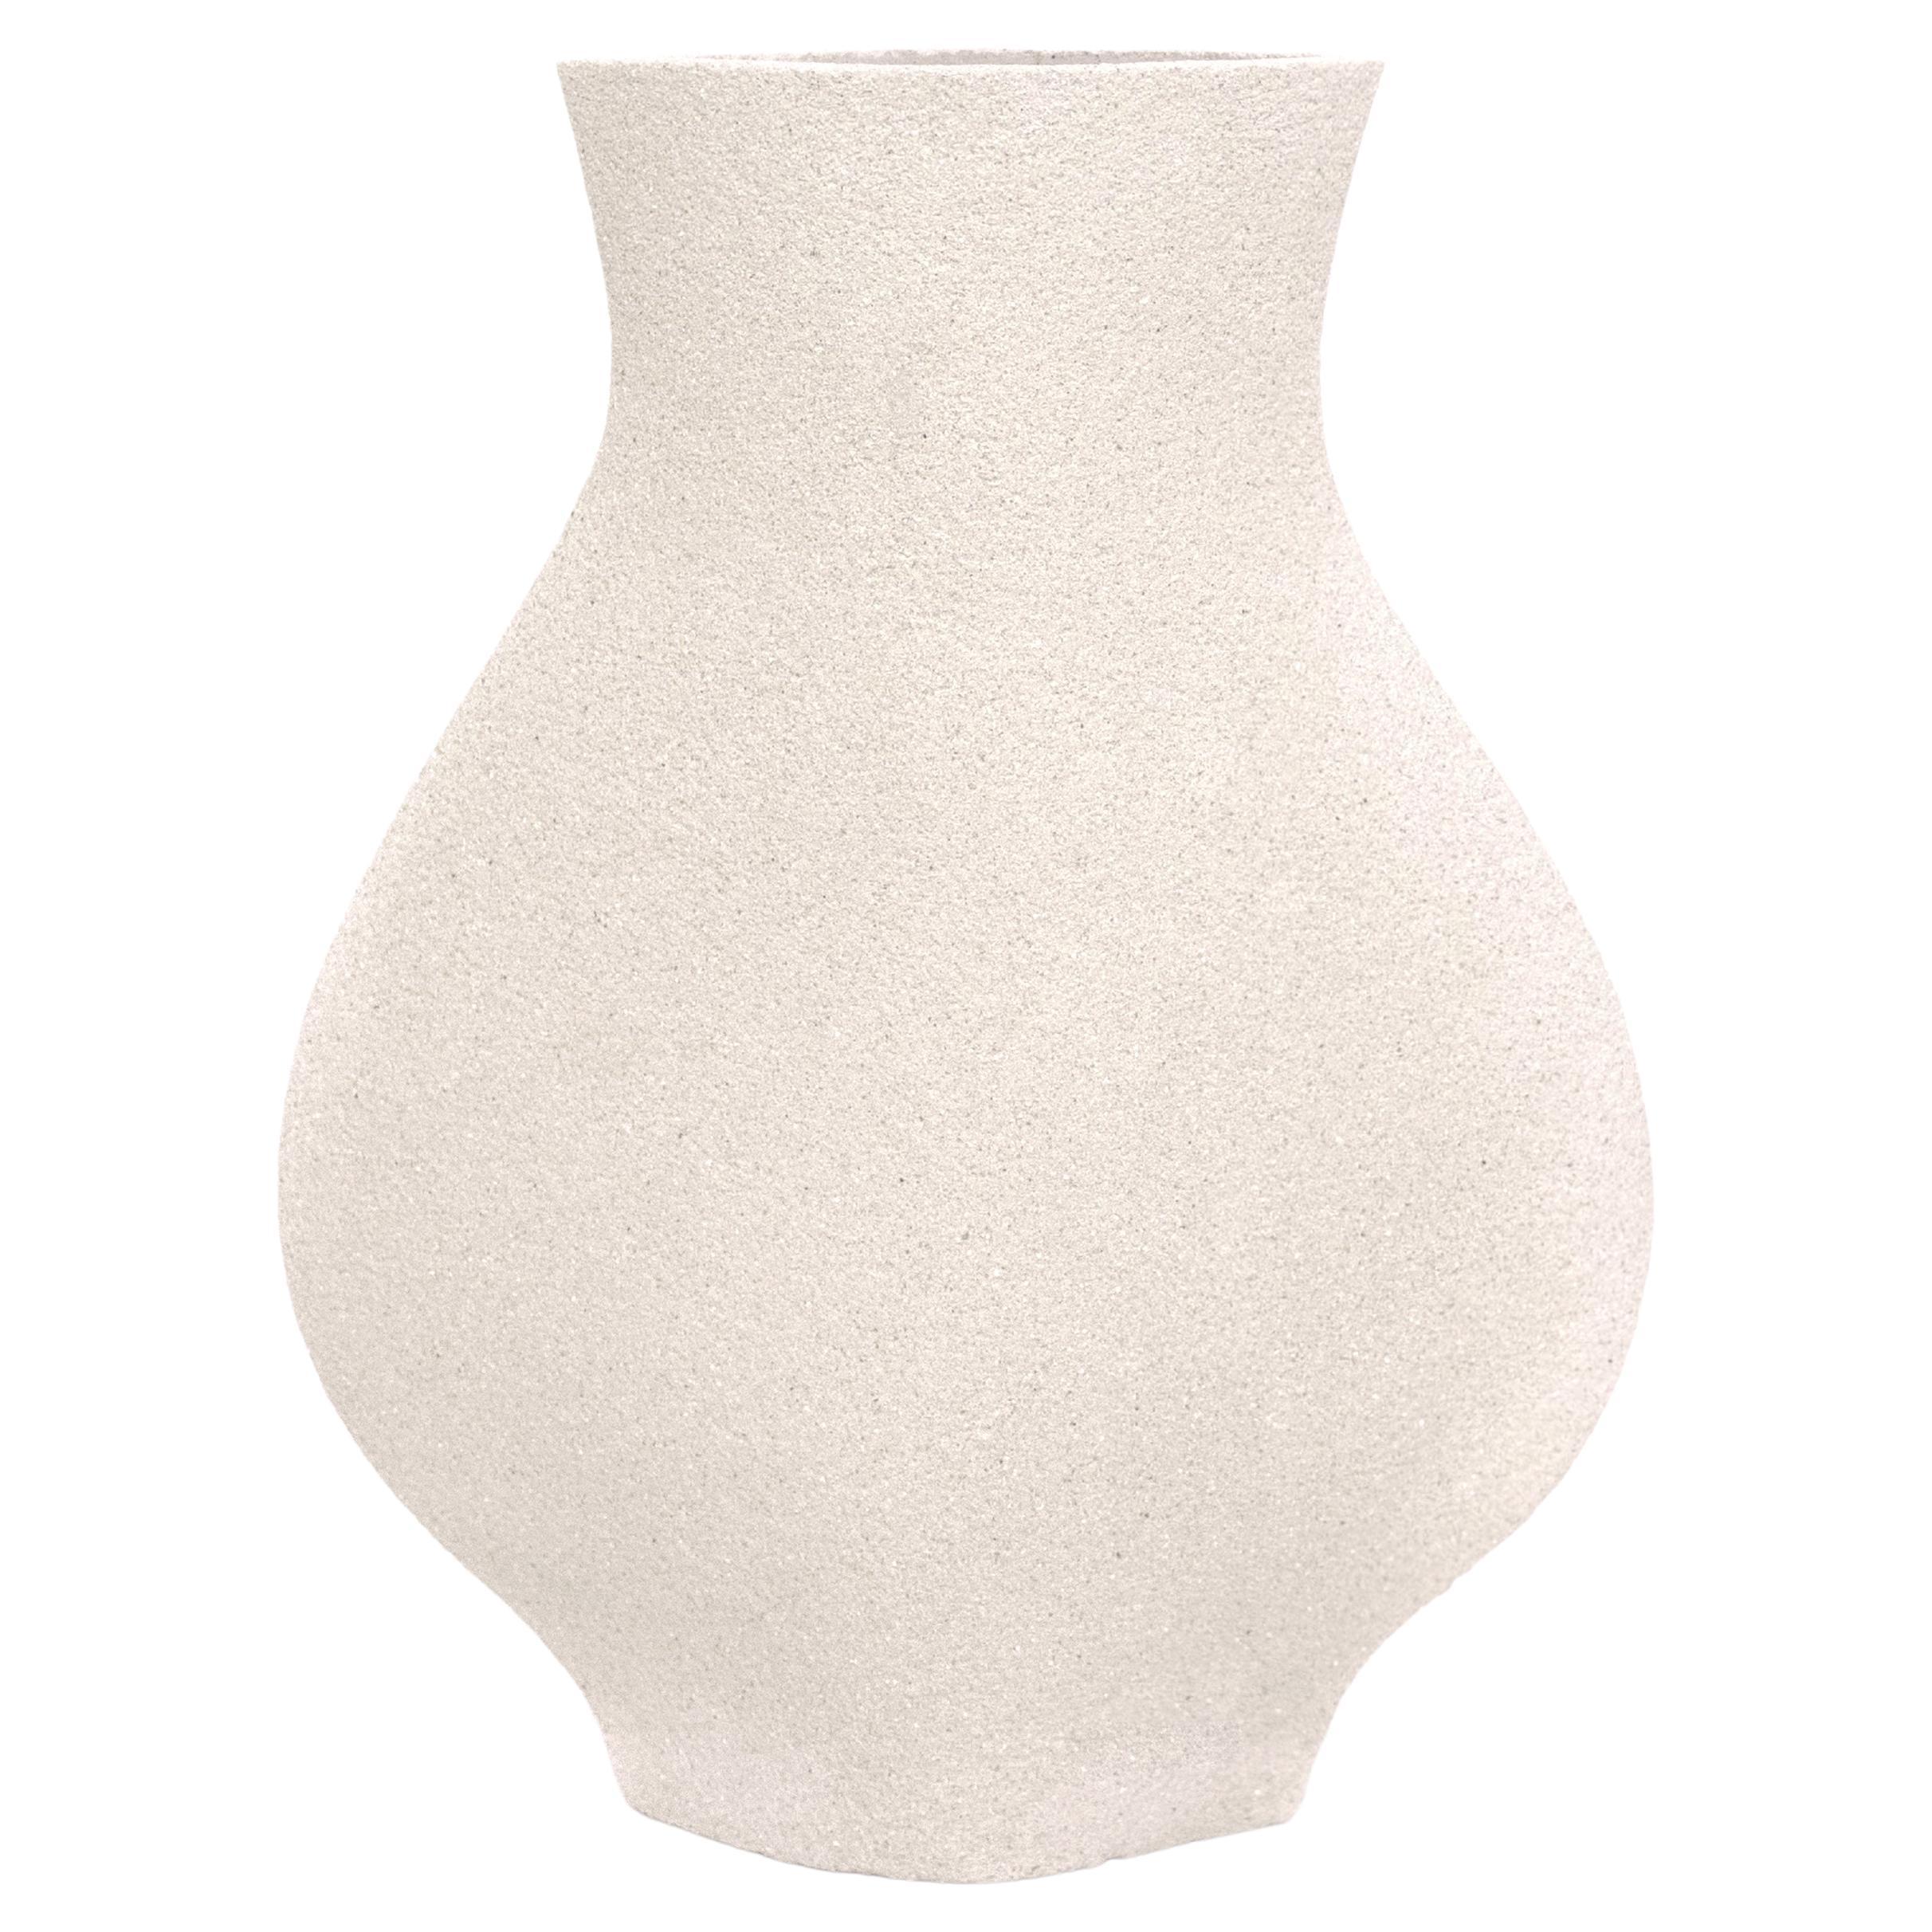 21st Century Jarre Vase in White Ceramic, Hand-Crafted in France